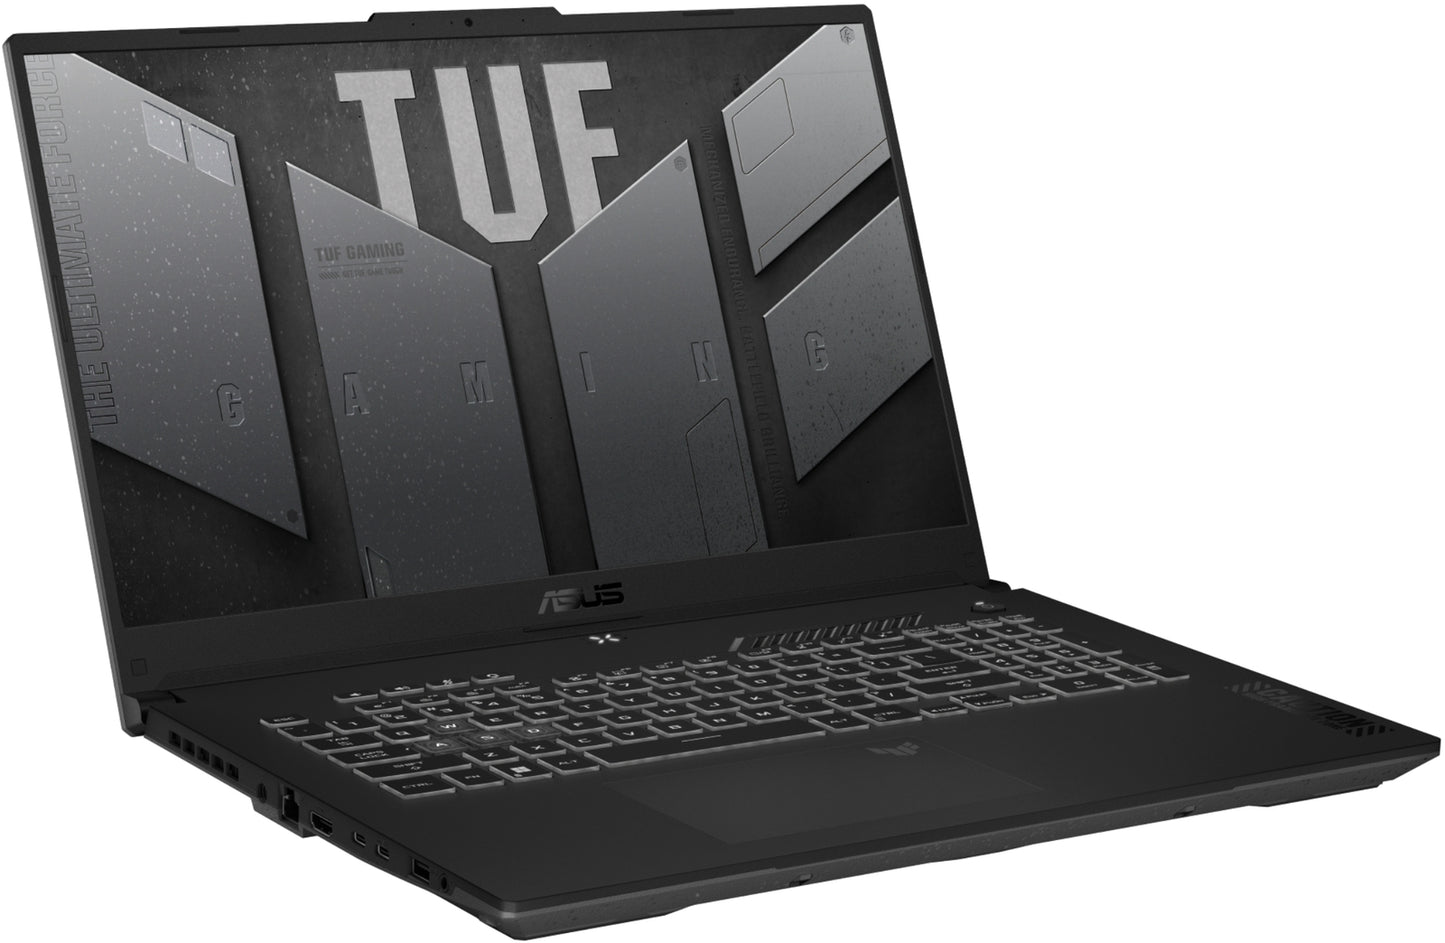 ASUS TUF Gaming F15 FX507ZC4-I716512G0W Intel I7 12th Gen | 16GB RAM | 512GB SSD | DLLS 3 NIVIDIA GeForce® RTX 3050 | 15.6-inch Overview Support